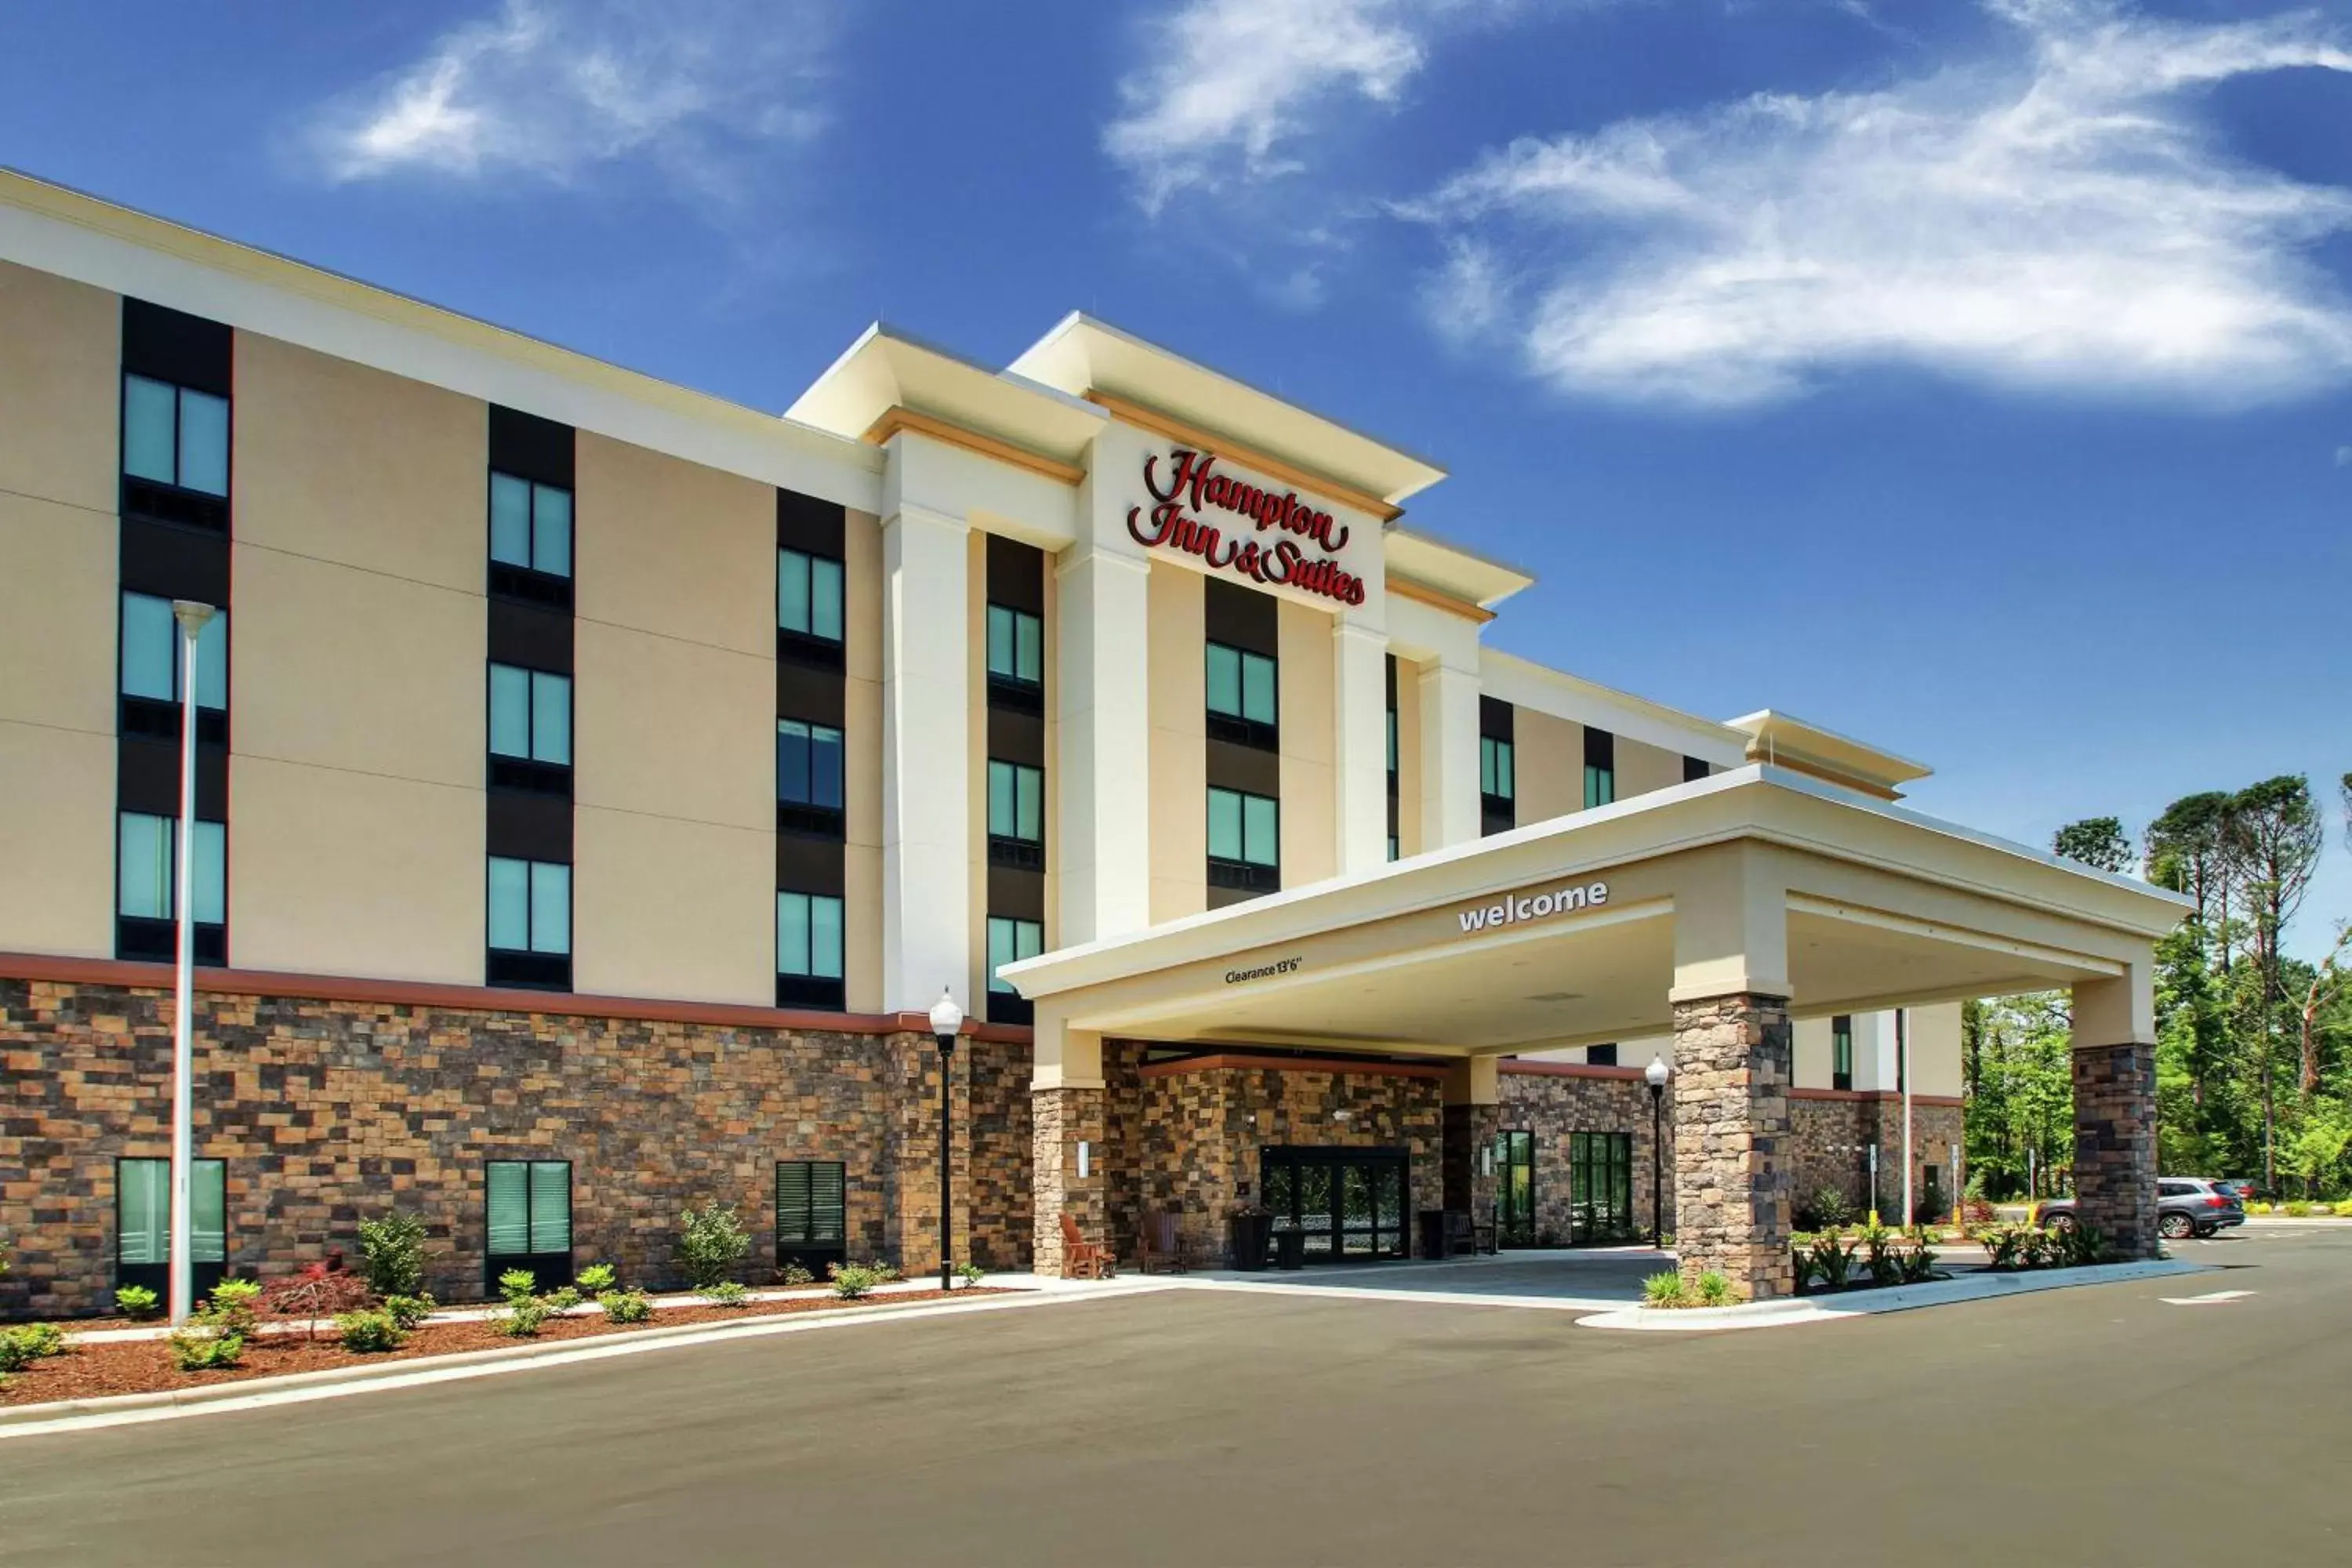 Property Building in Hampton Inn & Suites By Hilton Southport